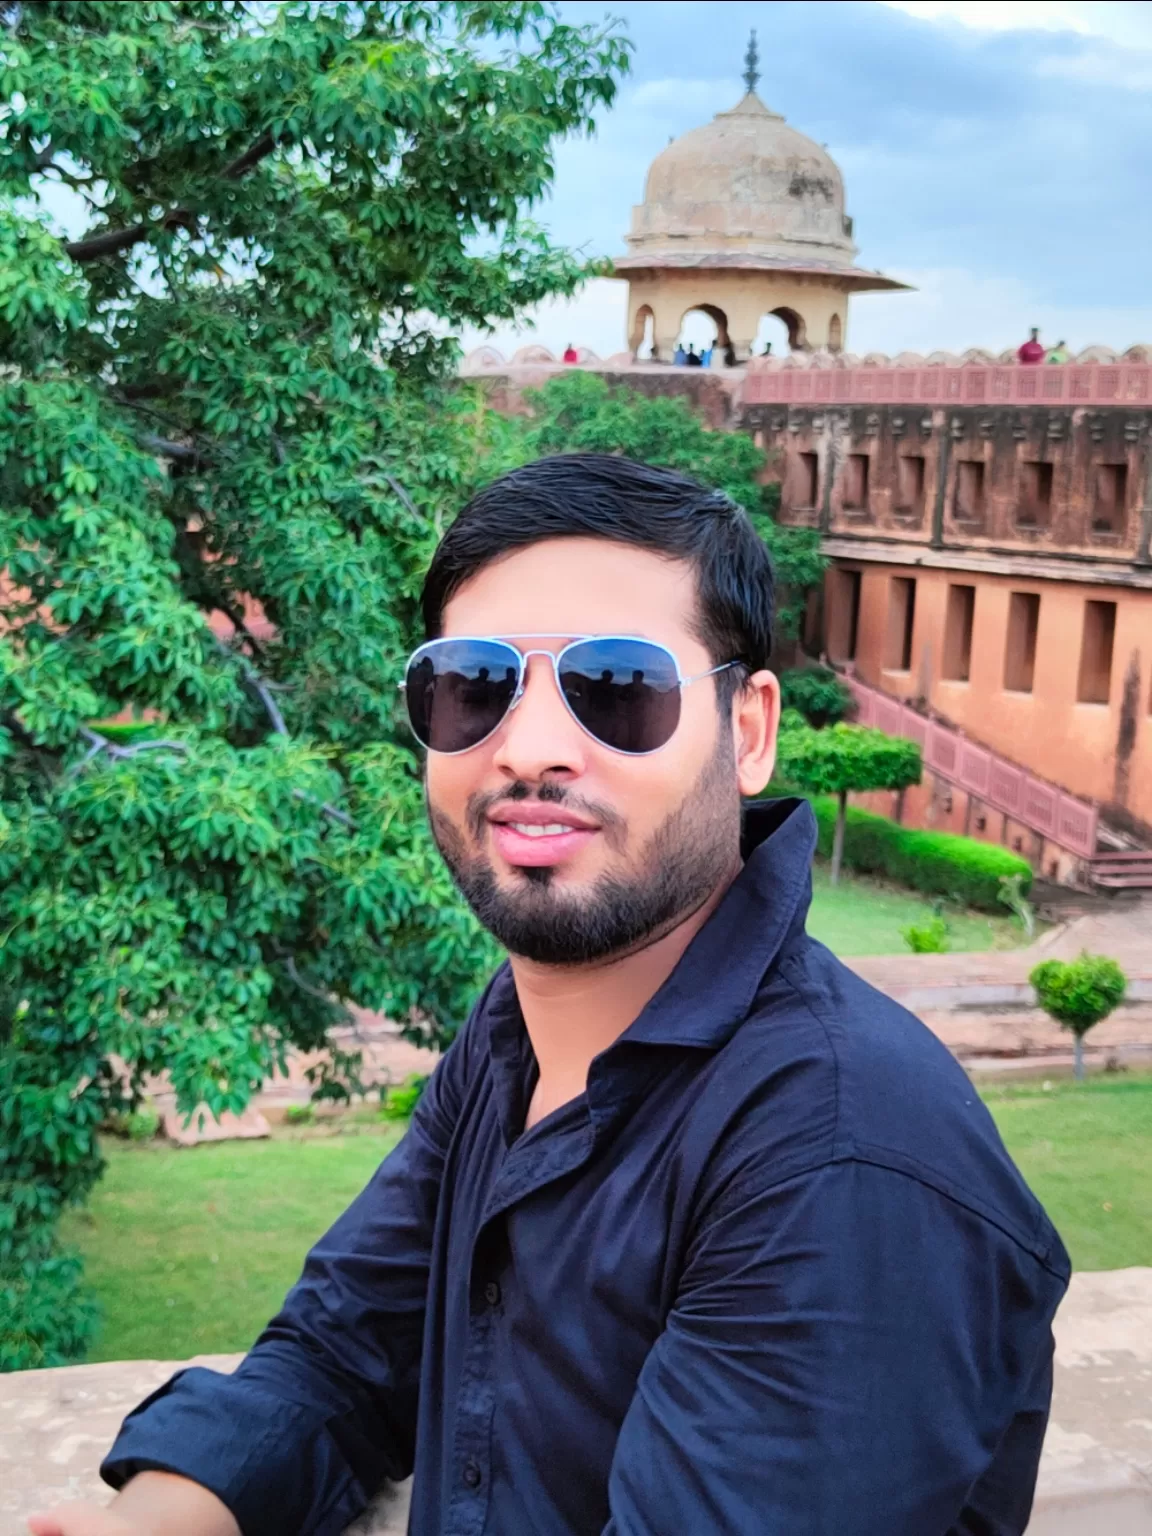 Photo of JAIGARH FORT By sushil prajapati